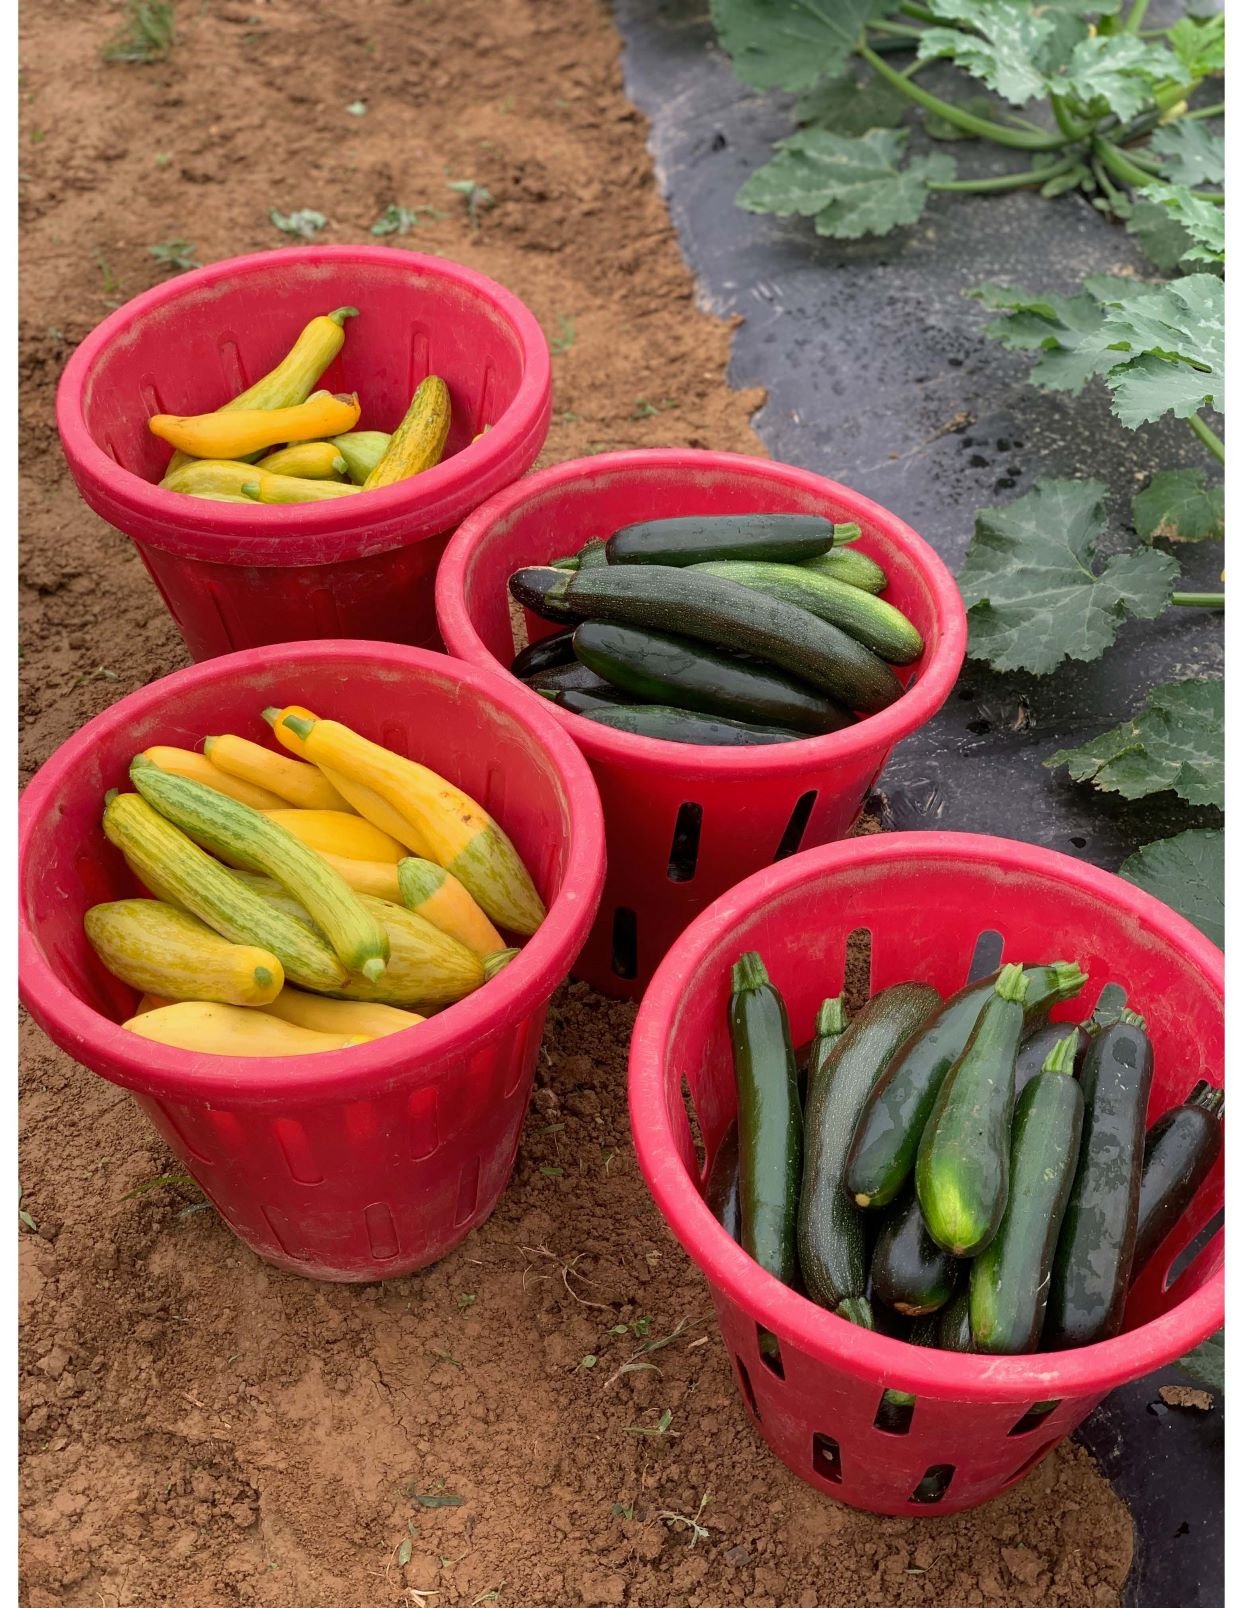 Previous Happening: Friday CSA: Dickinson College Farm Field Notes for Week of June 24th